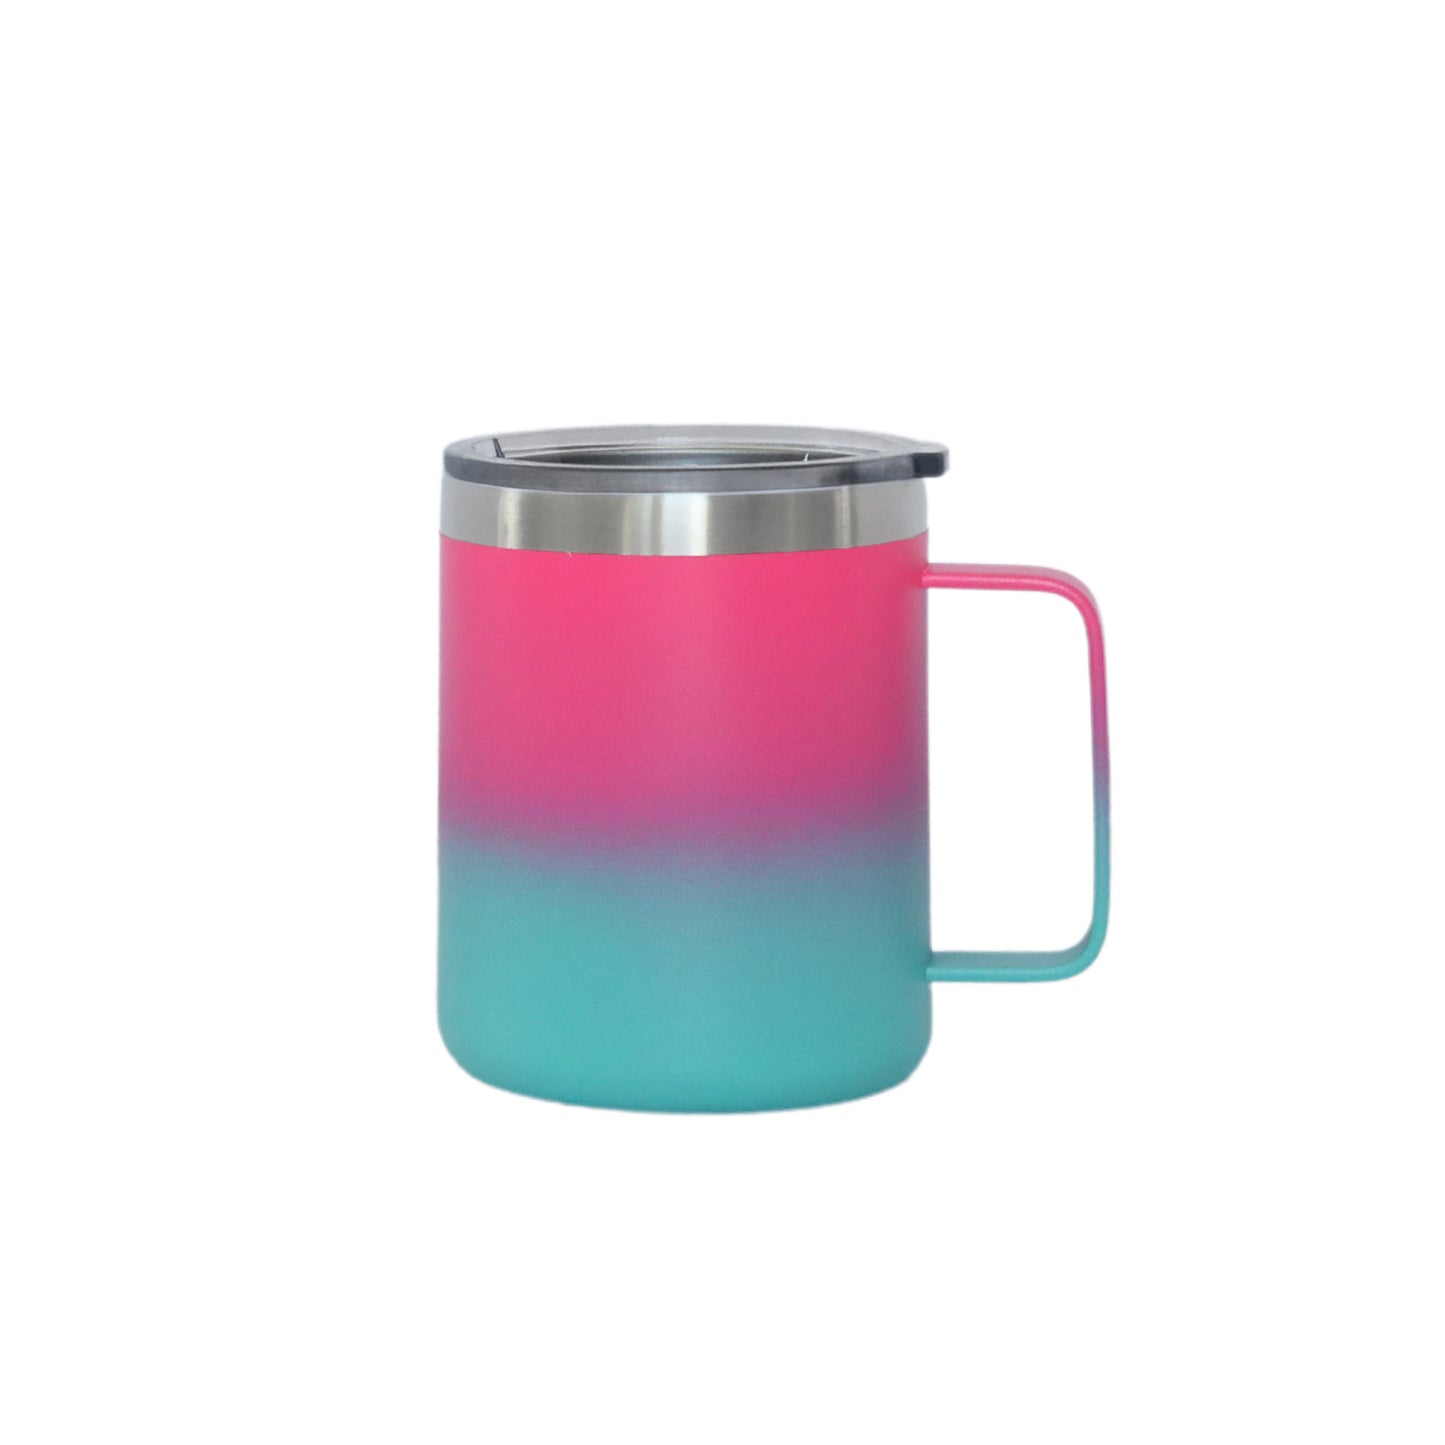 12 Oz Stainless Steel Travel Mug with Handle - Hot Pink & Blue